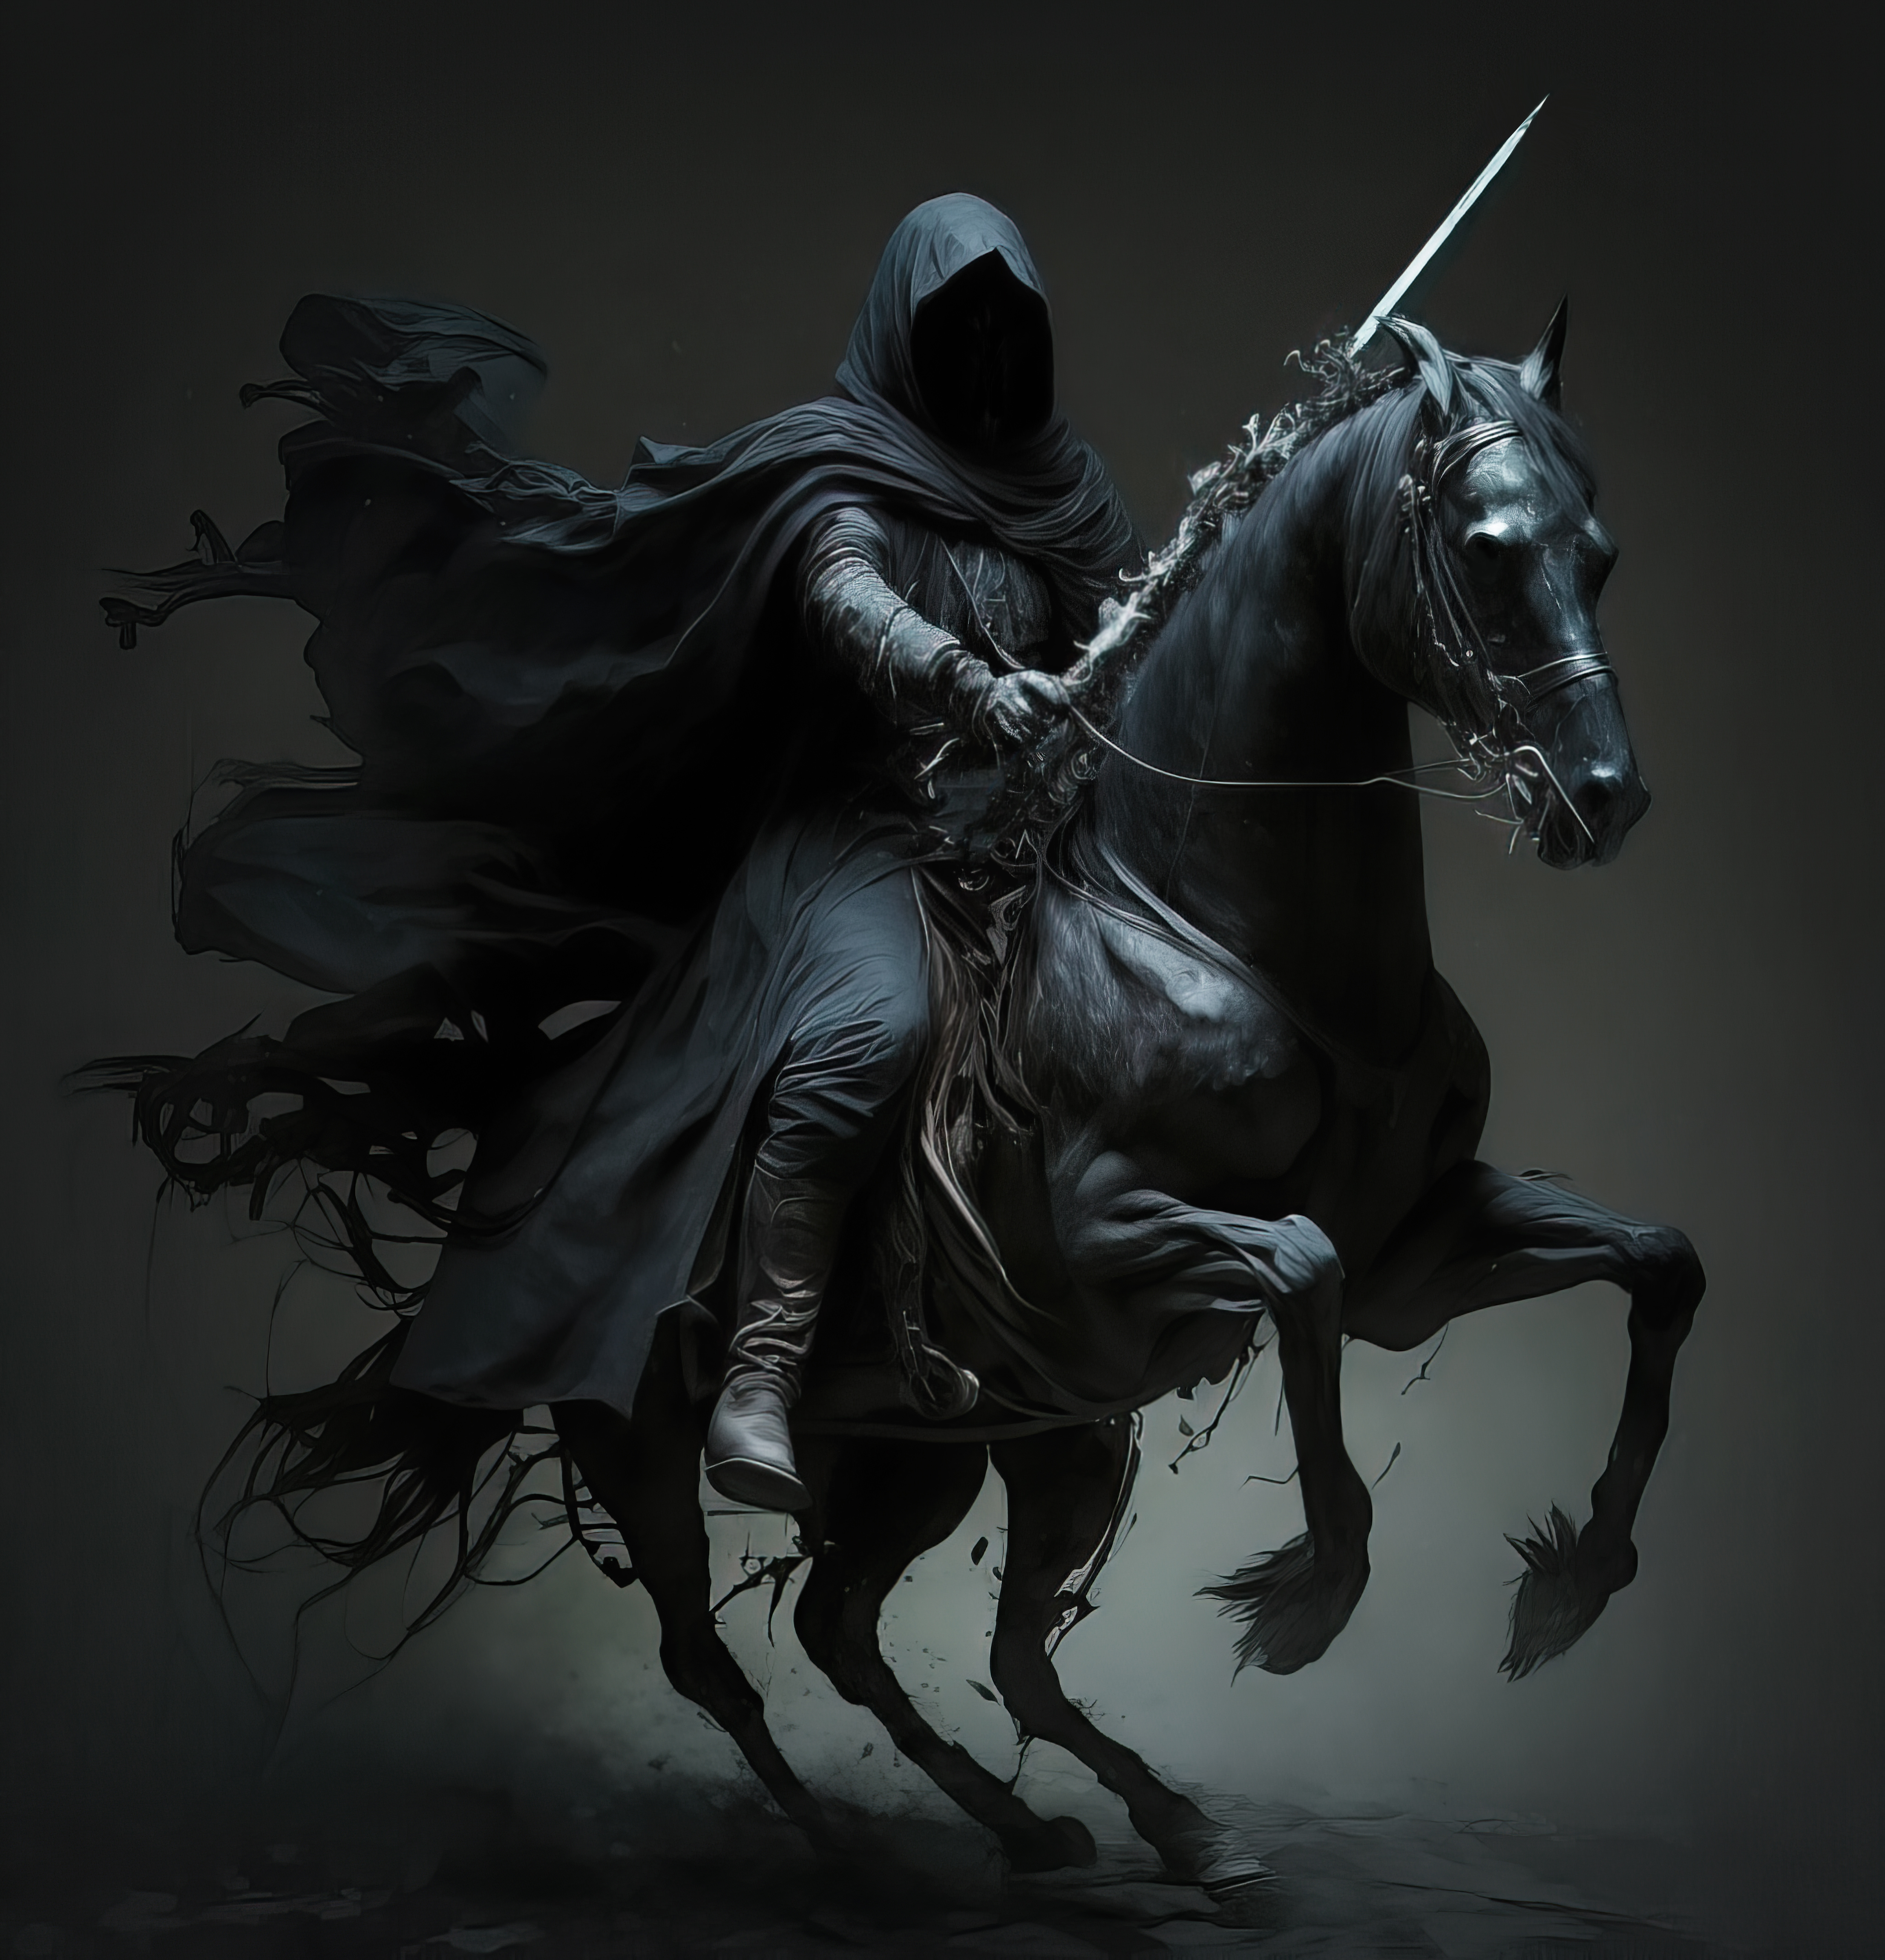 The dark knight in a cape on a horseback rearing, the angel of death, apocalypse dark fantasy concept. 